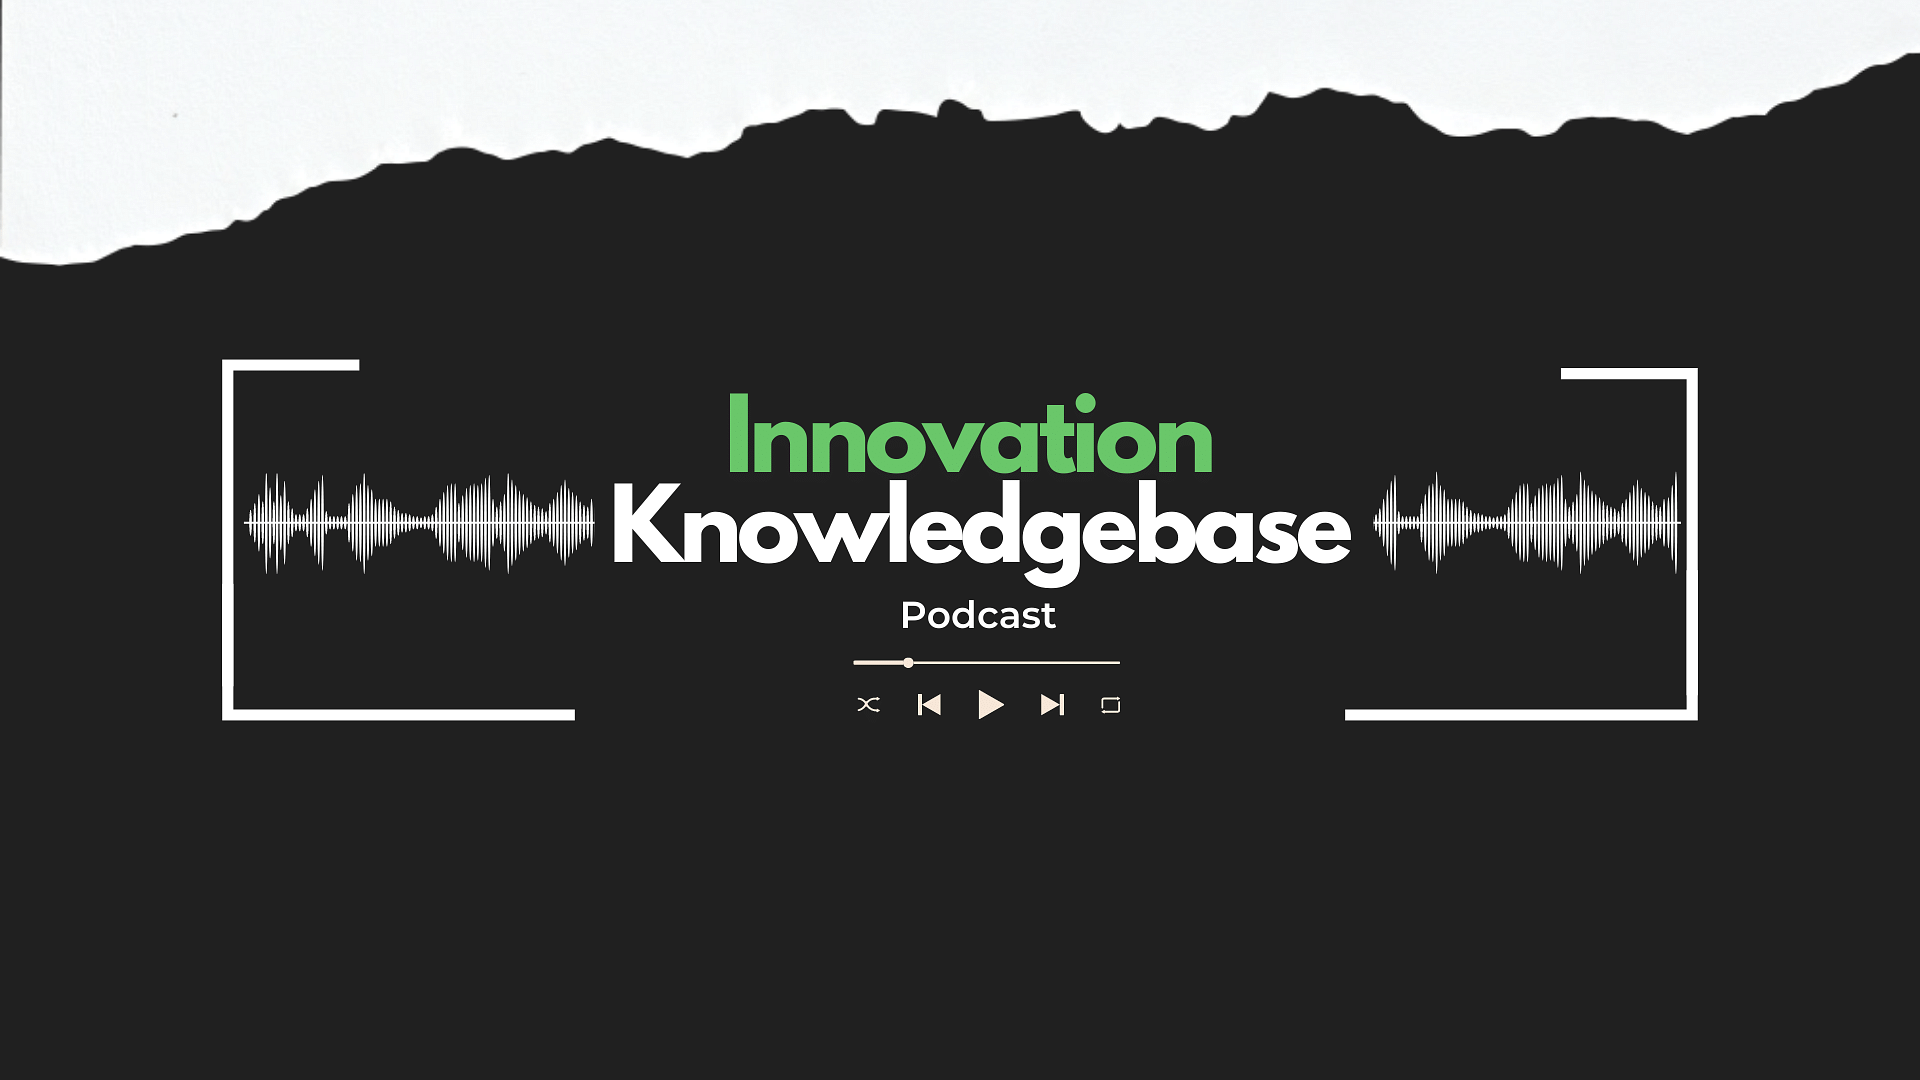 Innovation Conversation Podcast Episodes - Expert discussions on innovation strategies and game-changing insights